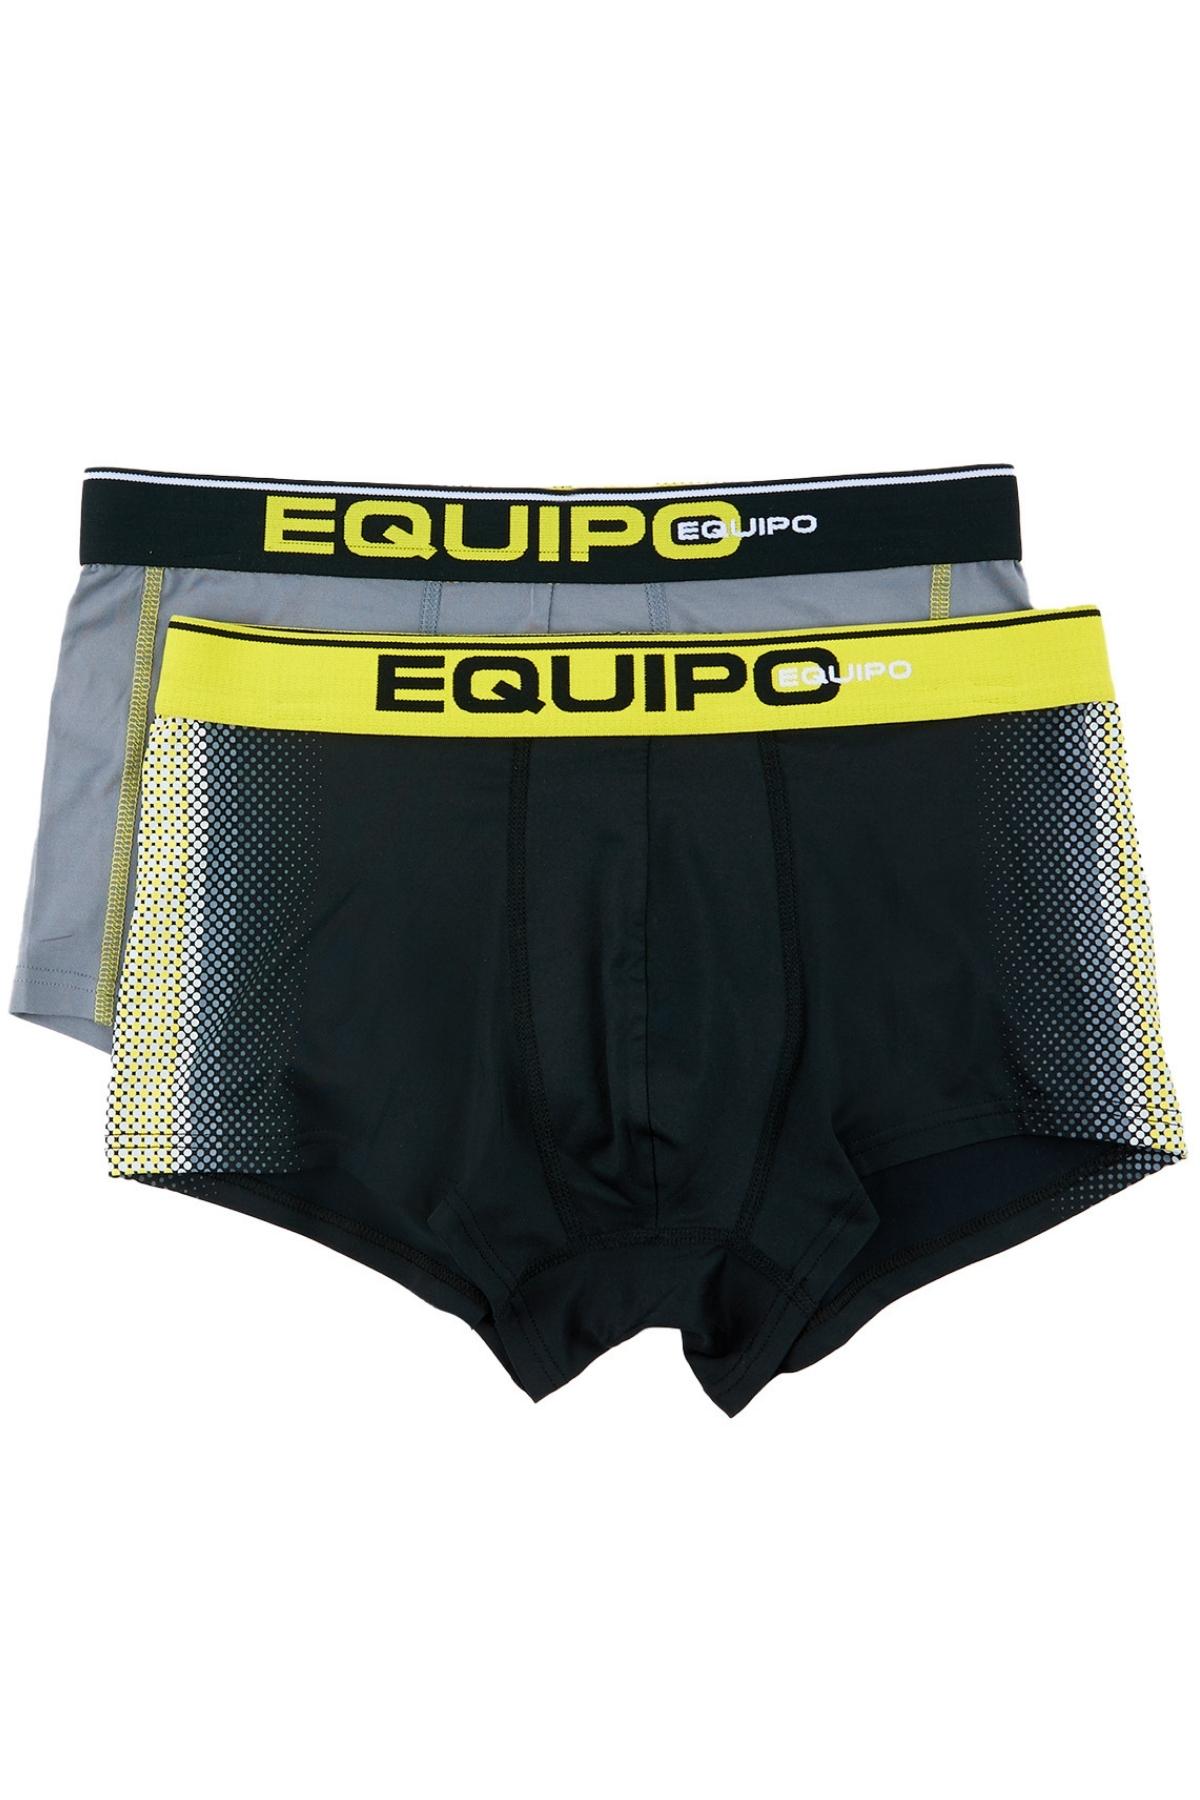 Equipo Grey and Dots Quick Dry Performace 2-Pack Trunks